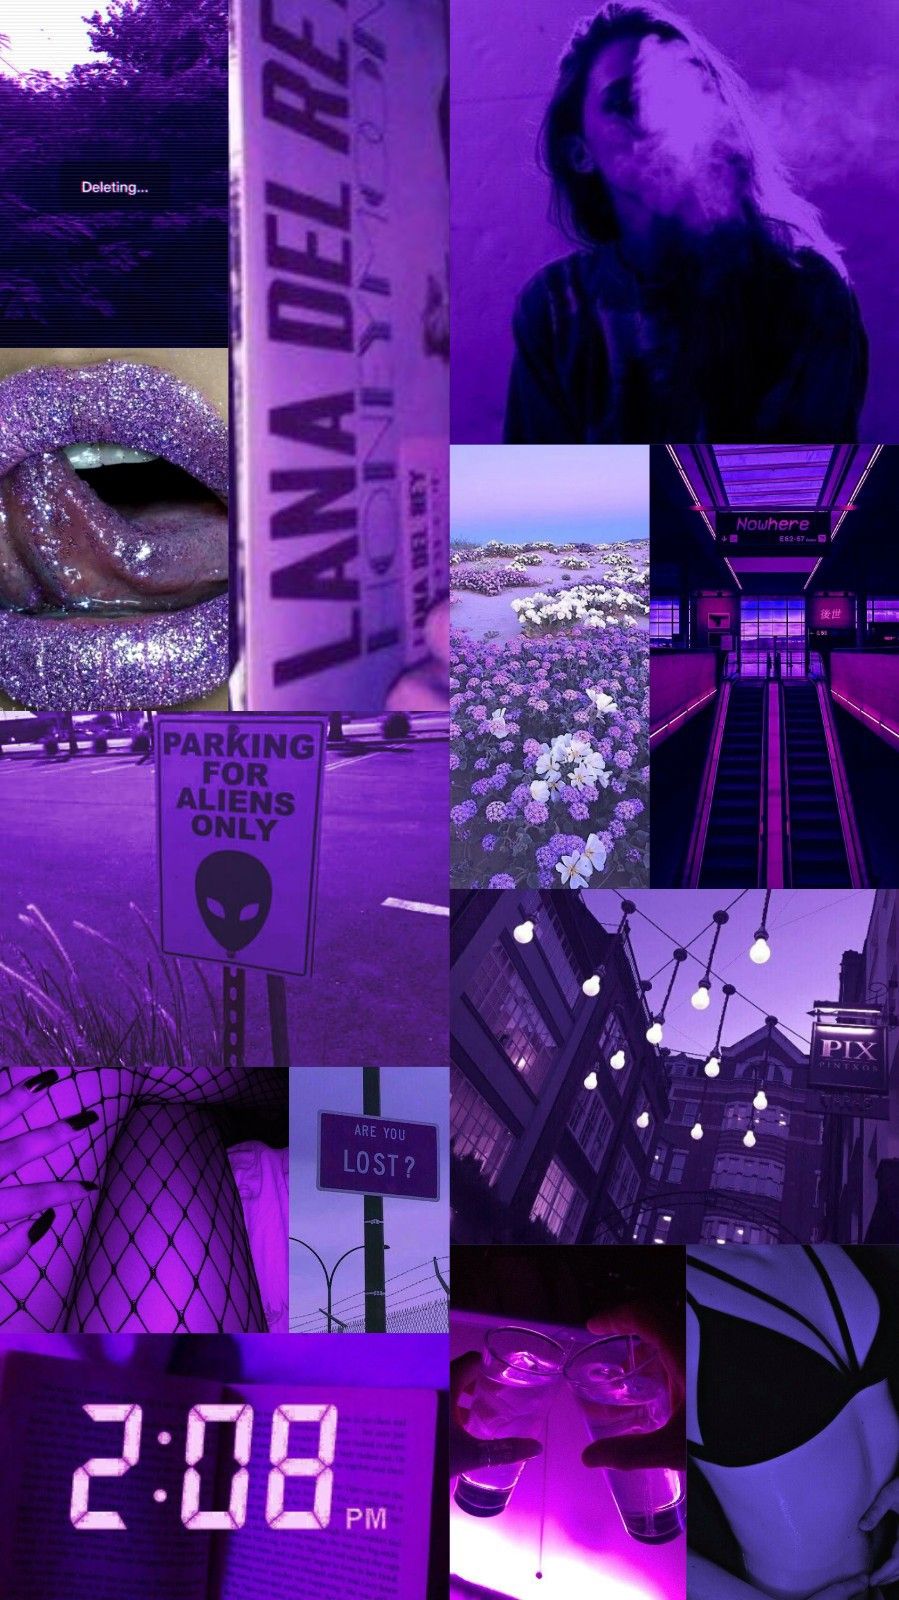 edgy wallpaper, purple, violet, text, graphic design, collage, font, poster, cg artwork, graphics, fictional character